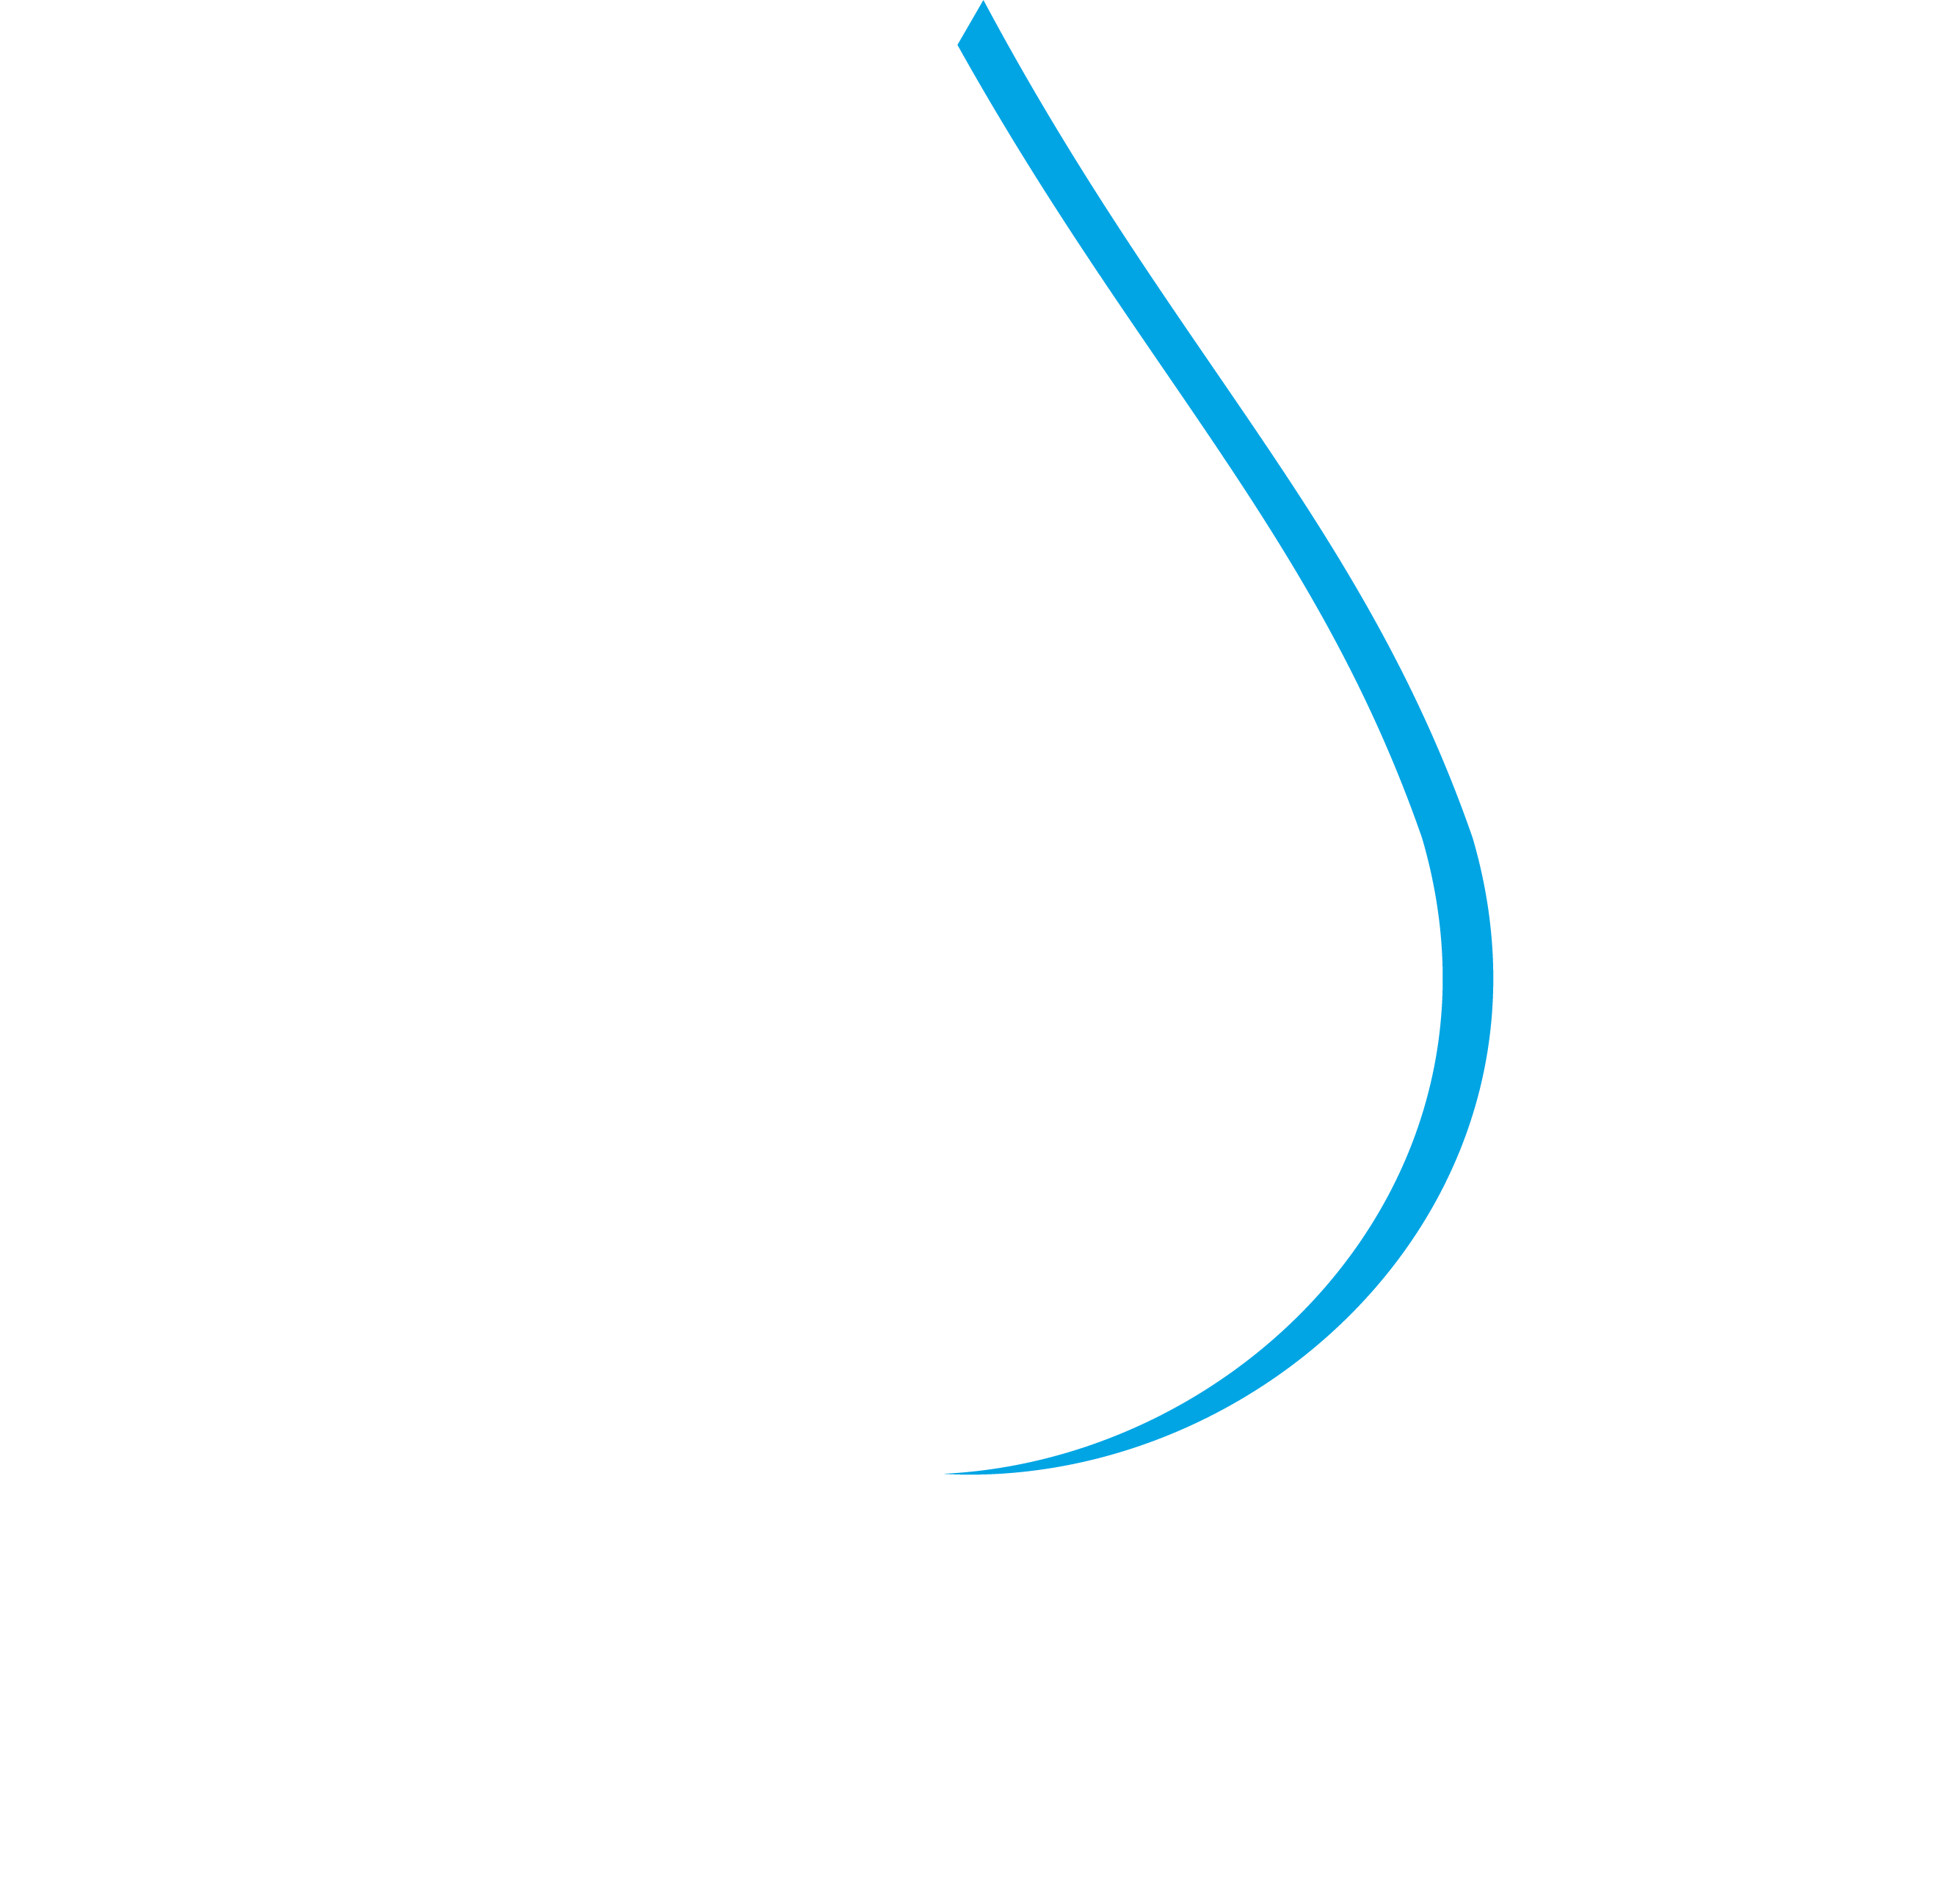 Welcome to Mempure